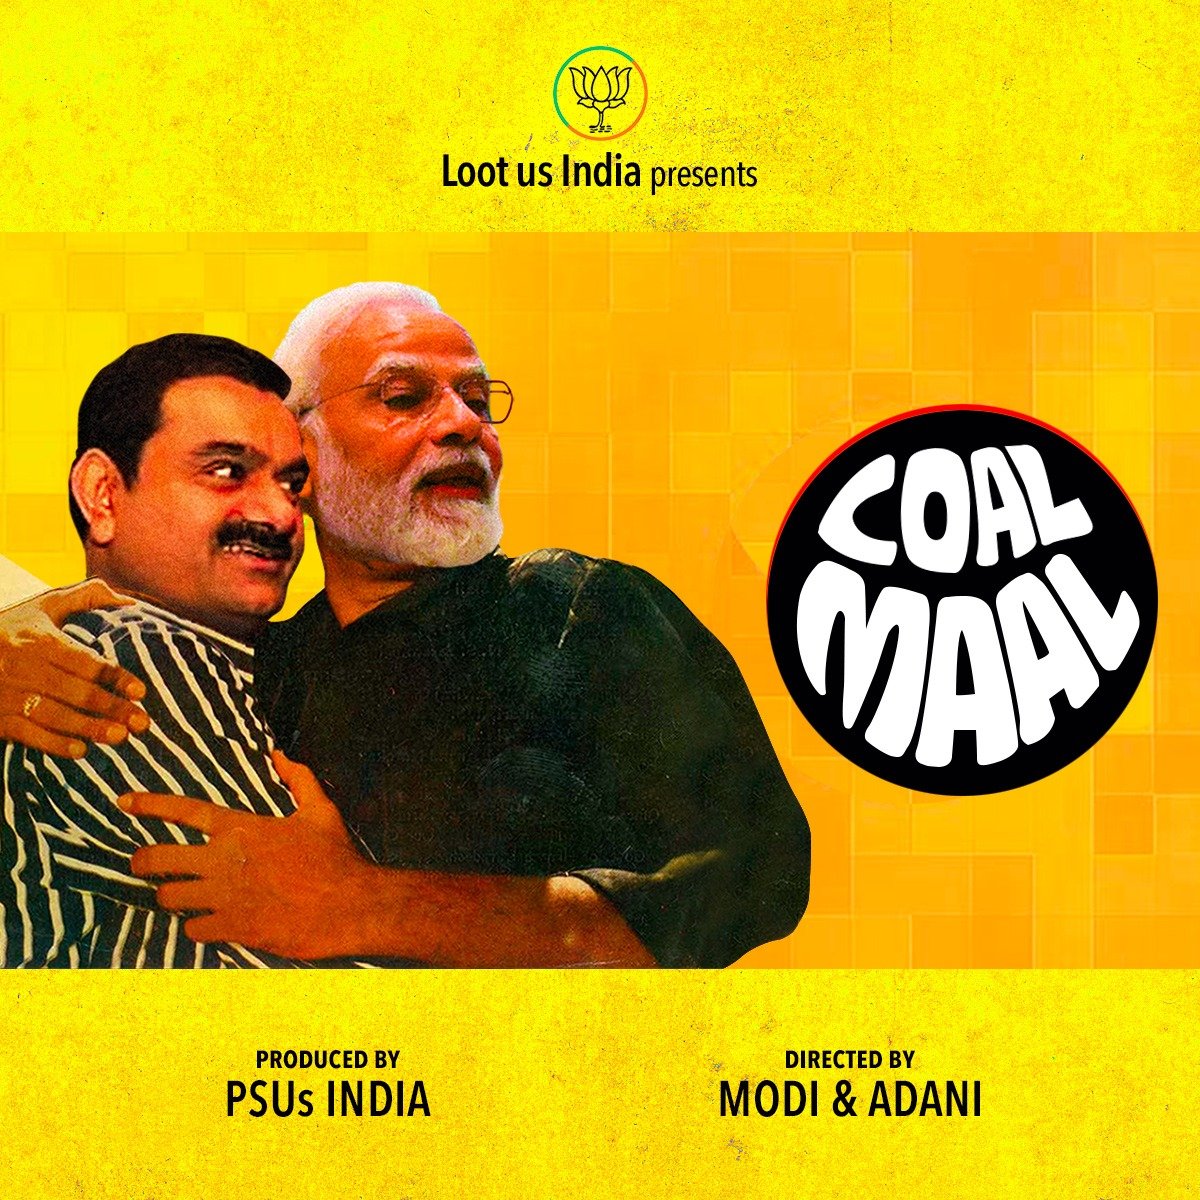 Modi's preference to industrialists has been the main hallmark of his governance significantly widening the rich-poor divide #adani notably, has been a major beneficiary, receiving lucrative coal mines was actually gifted with the rich coal mines by @narendramodi If a movie